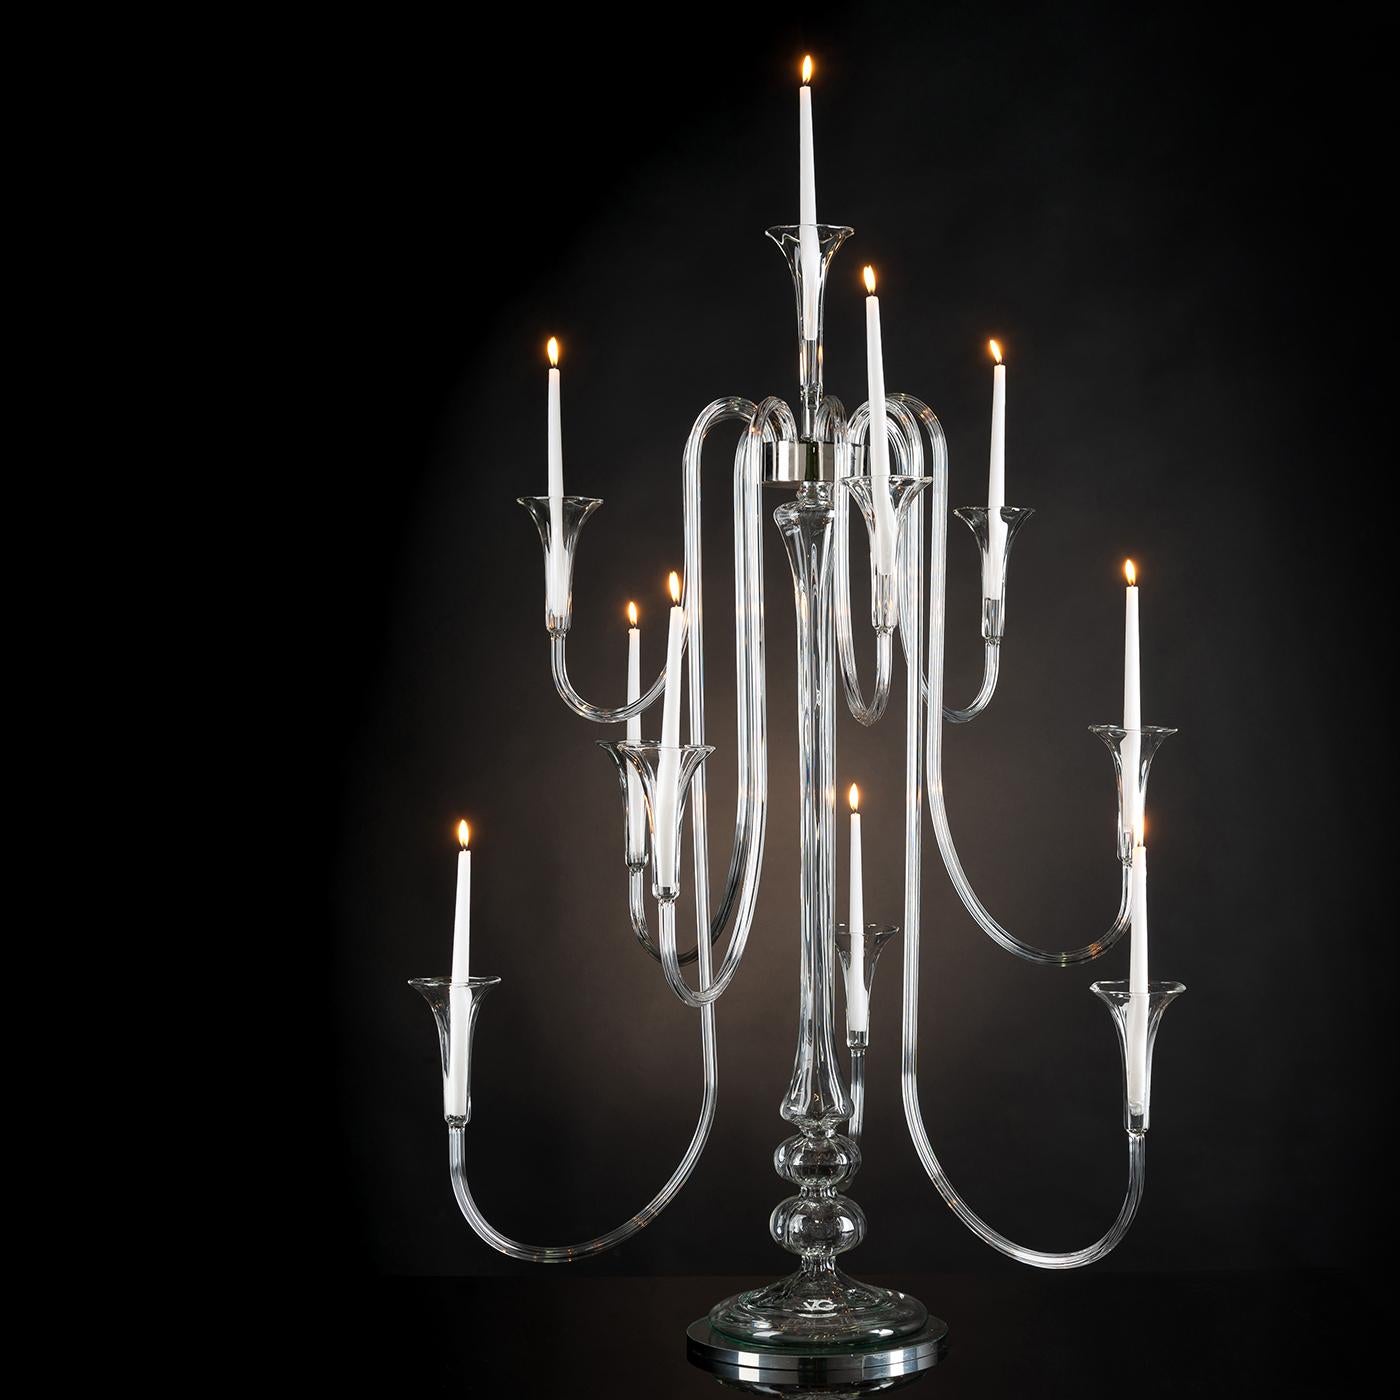 A stunning profile marked by sinuous and dynamic arms, this stunning candelabra will make a refined addition to a modern or eclectic decor. Deftly handcrafted of glass showcasing a natural transparent quality, each arm ends with a flared sconce that